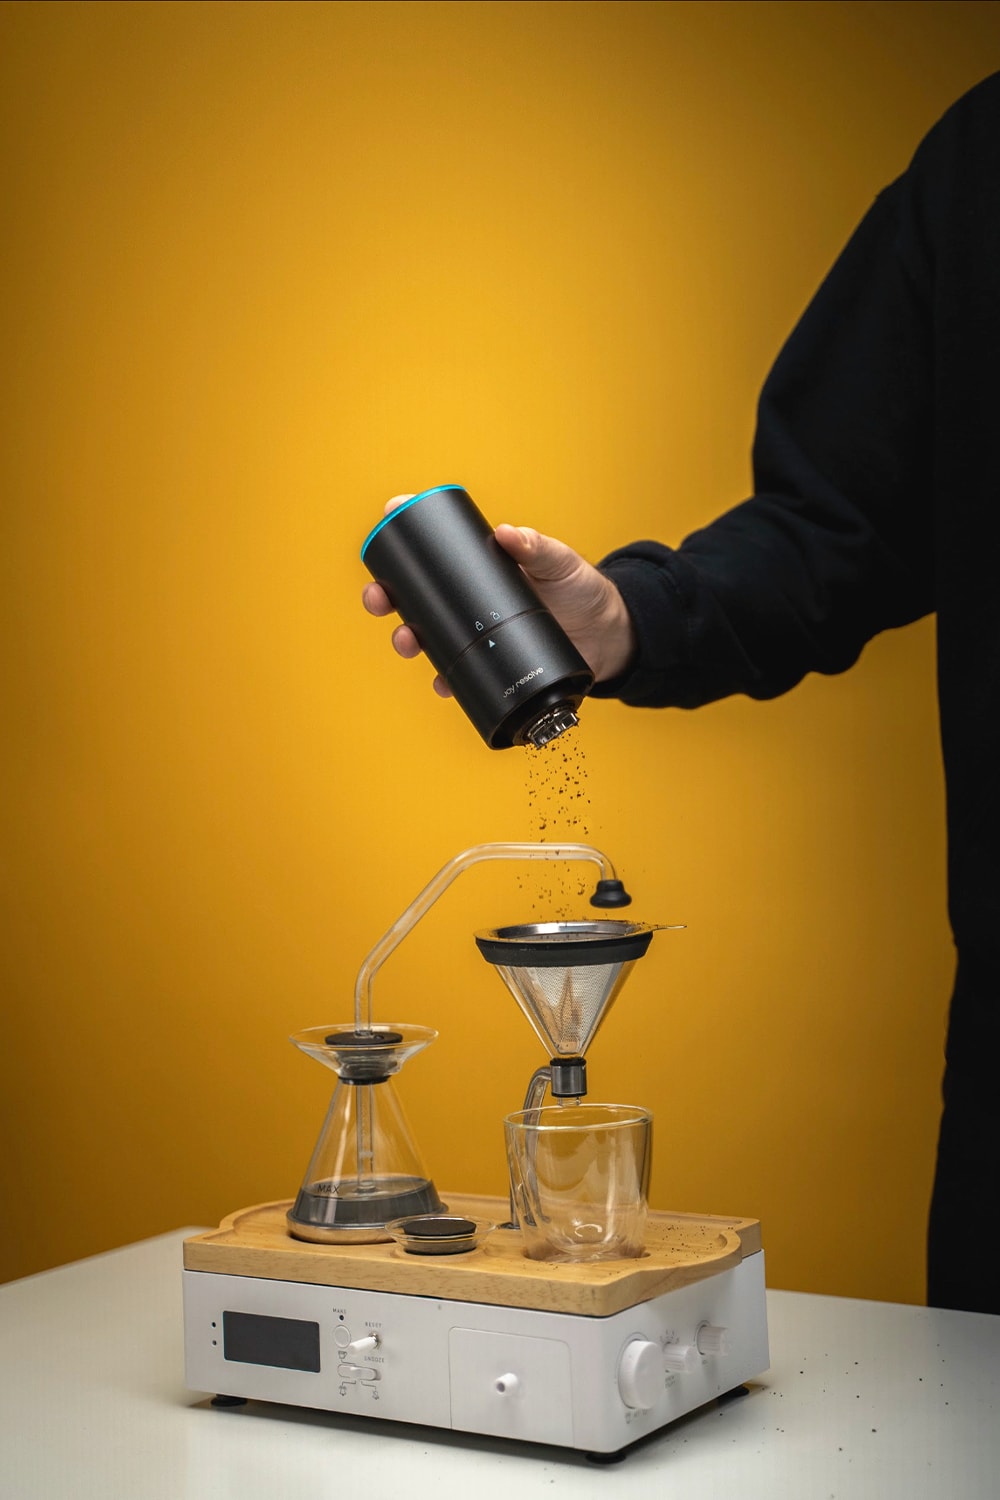 An Interview with Joy Resolve's Josh Renouf, the Designer Behind 'That' Viral Coffee Making Alarm Clock 